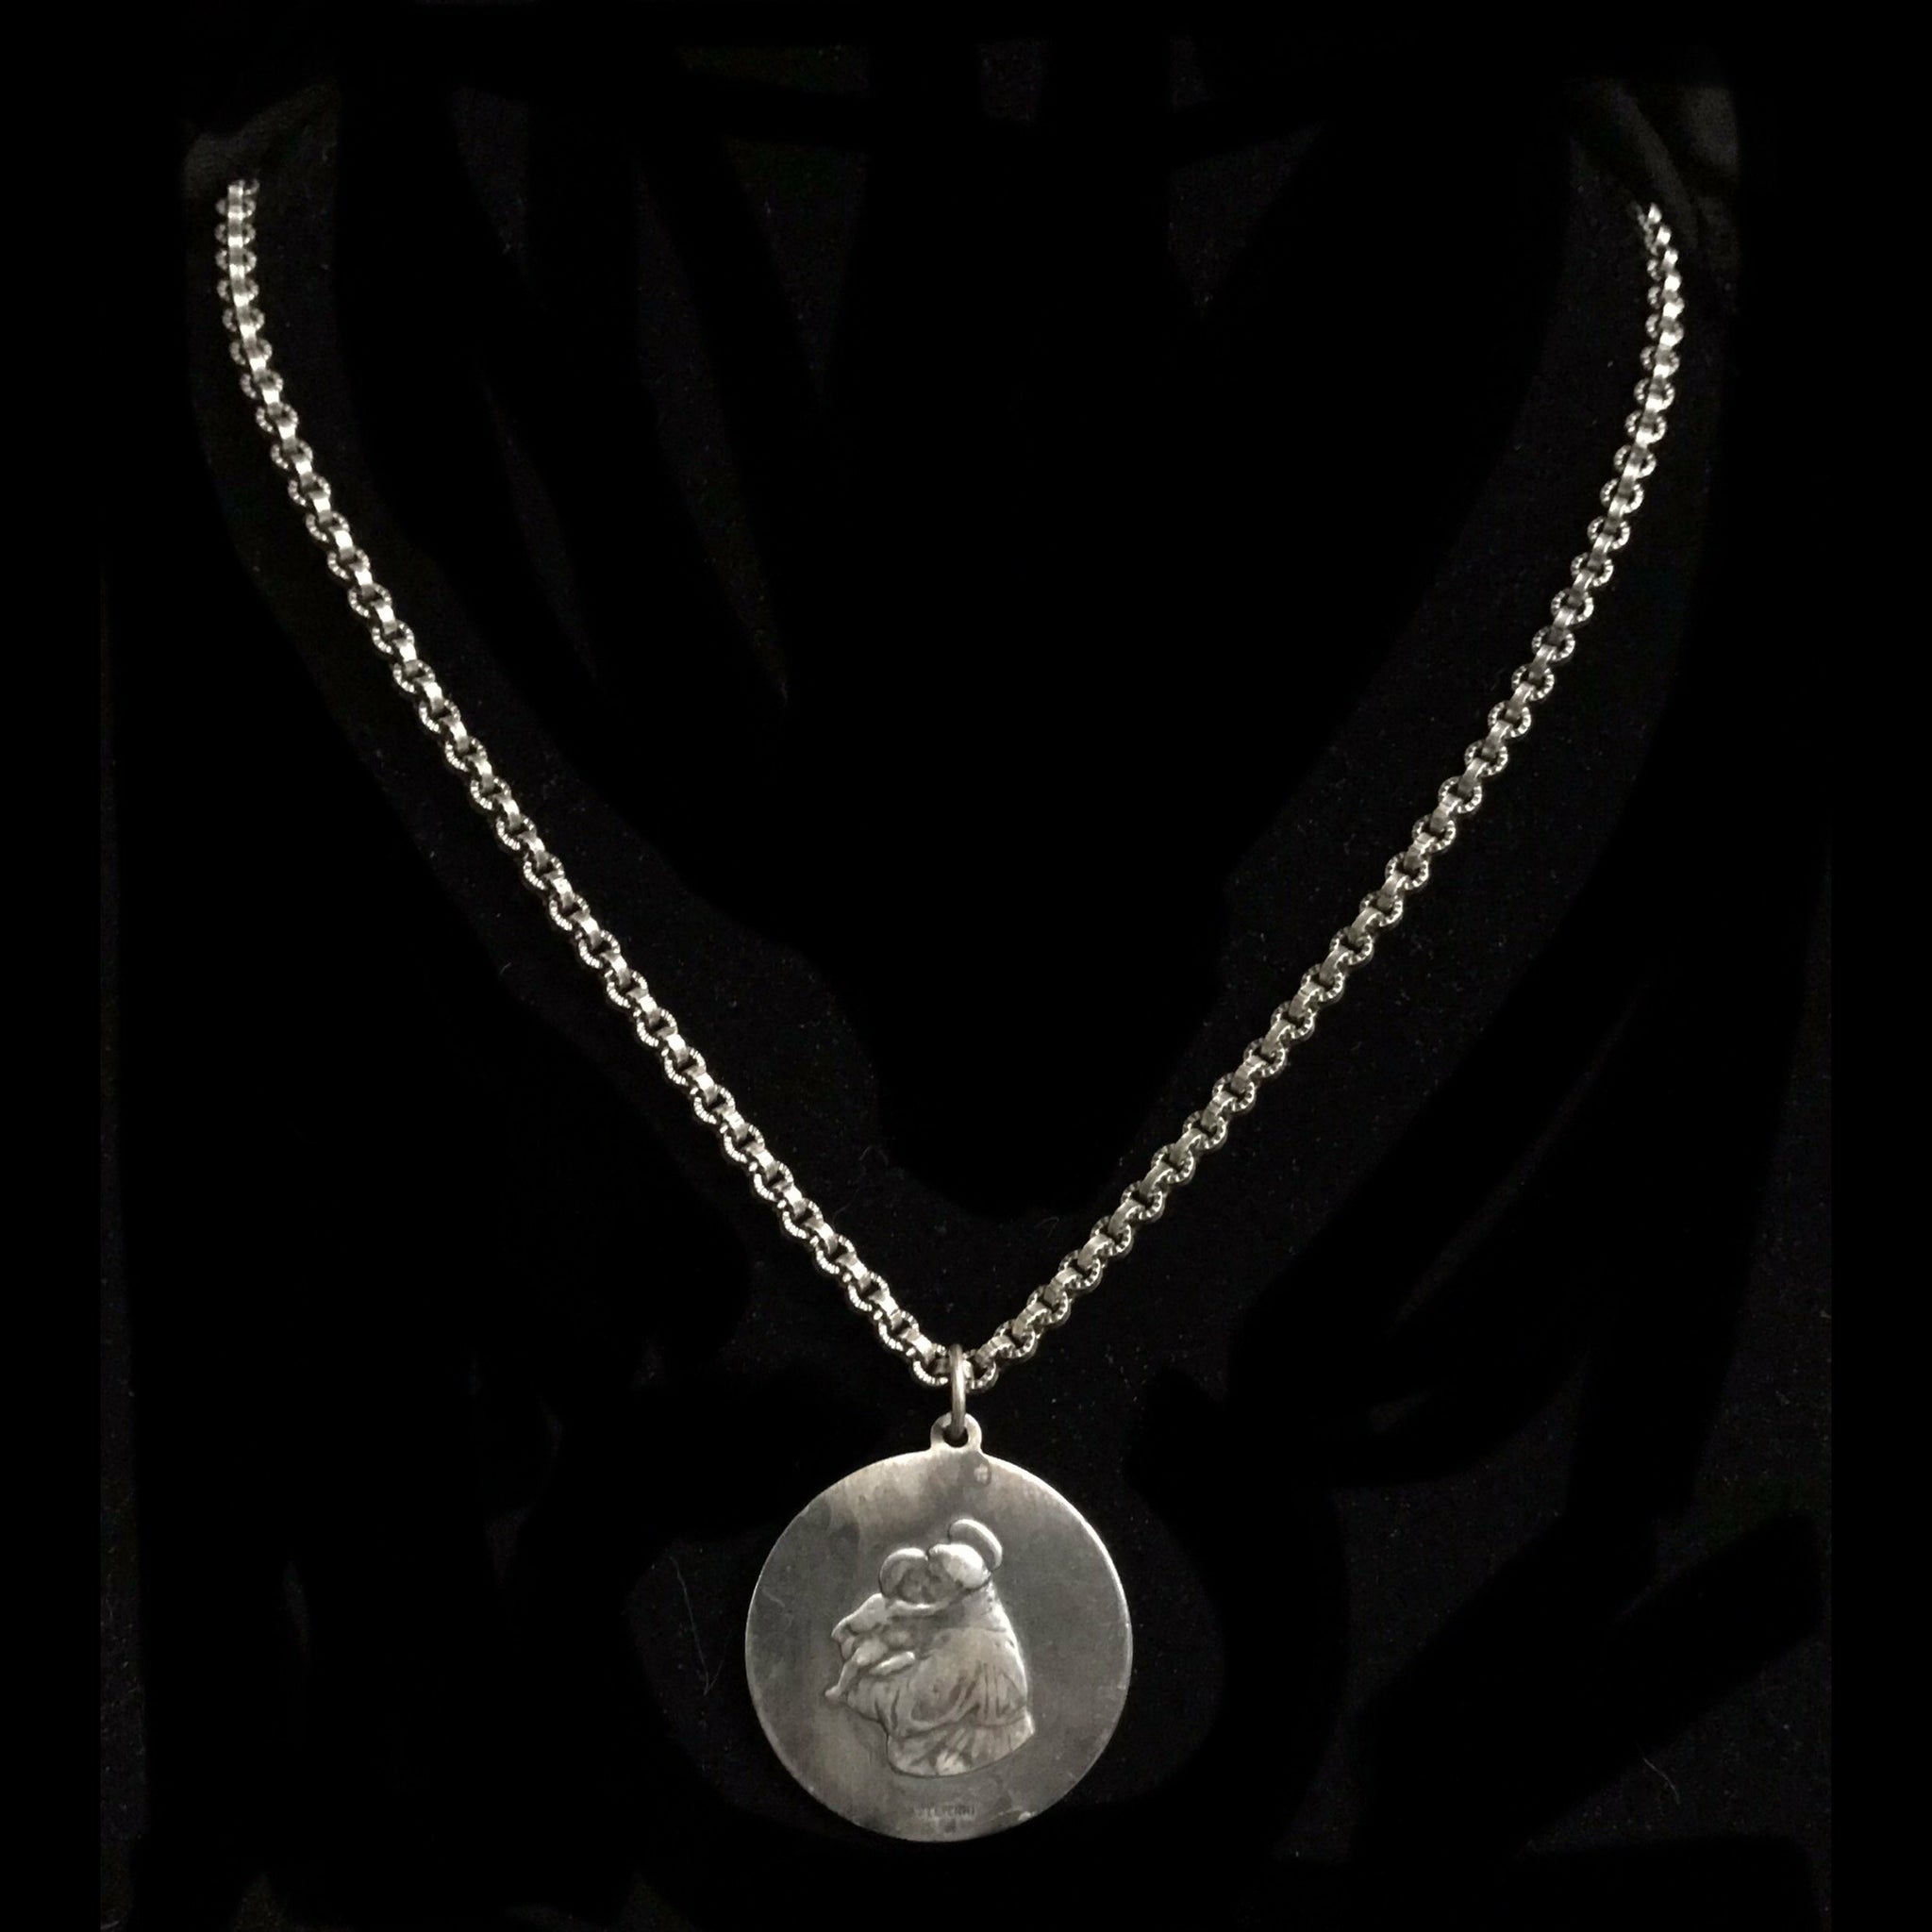 SAINT CHRISTOPHER NECKLACE – Dirty Hands Jewelry